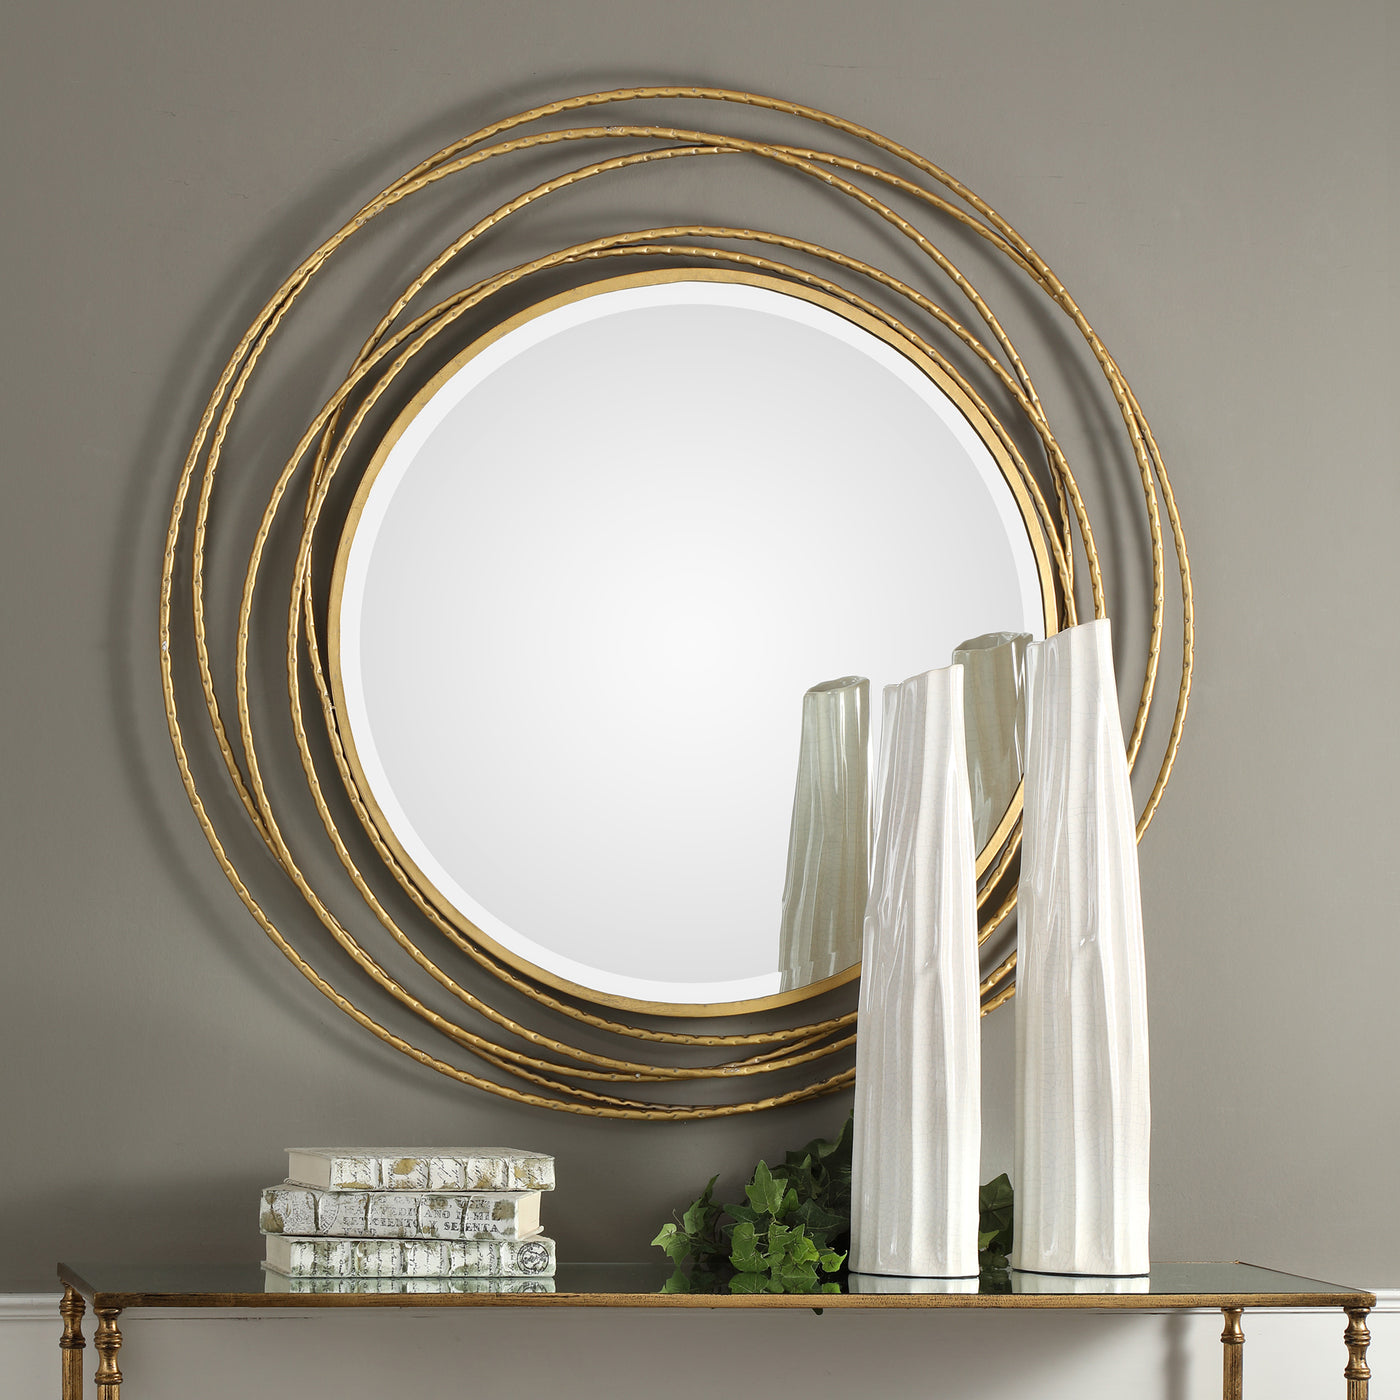 Hand Forged Iron Coils, Finished In A Metallic Gold Leaf, Accented With A Subtle Hammered Texture. Mirror Features A Gener...